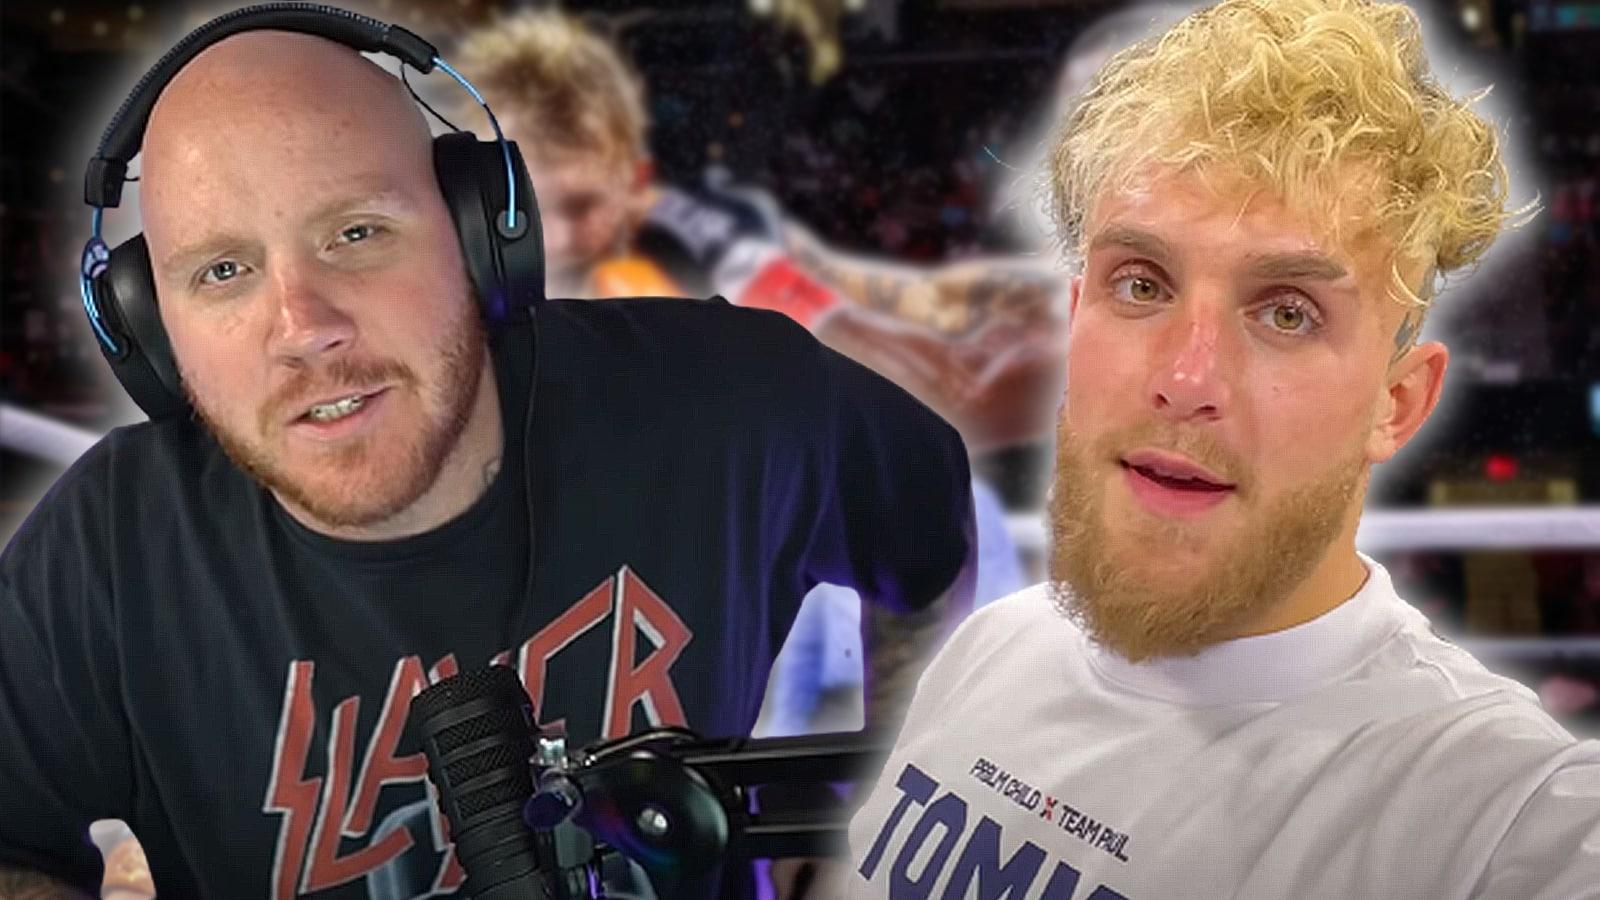 TimThetatman claims jake paul is good for boxing